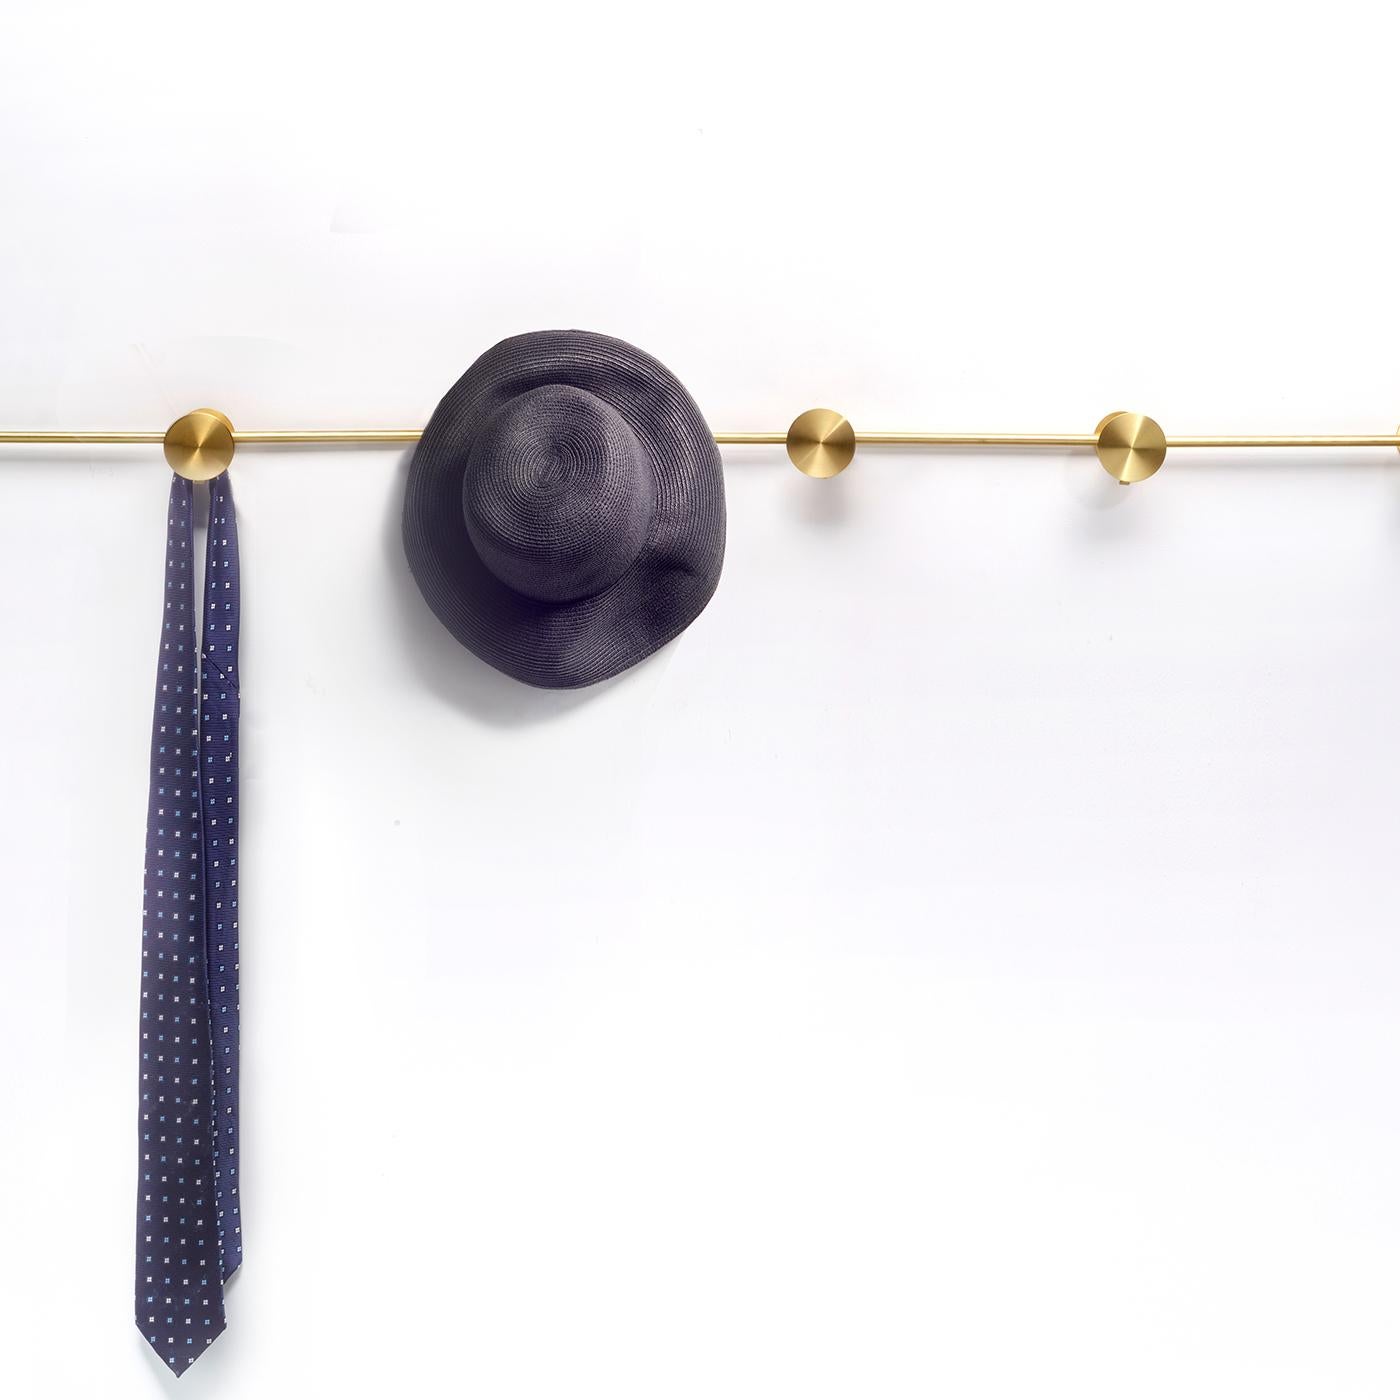 Inspired by the vintage accordion wooden coat hanger, this coat rack is made of polished brass with a flexible structure that can be shaped to suit interior needs and individual aesthetics. This modern design features six small knobs (6 cm) with a